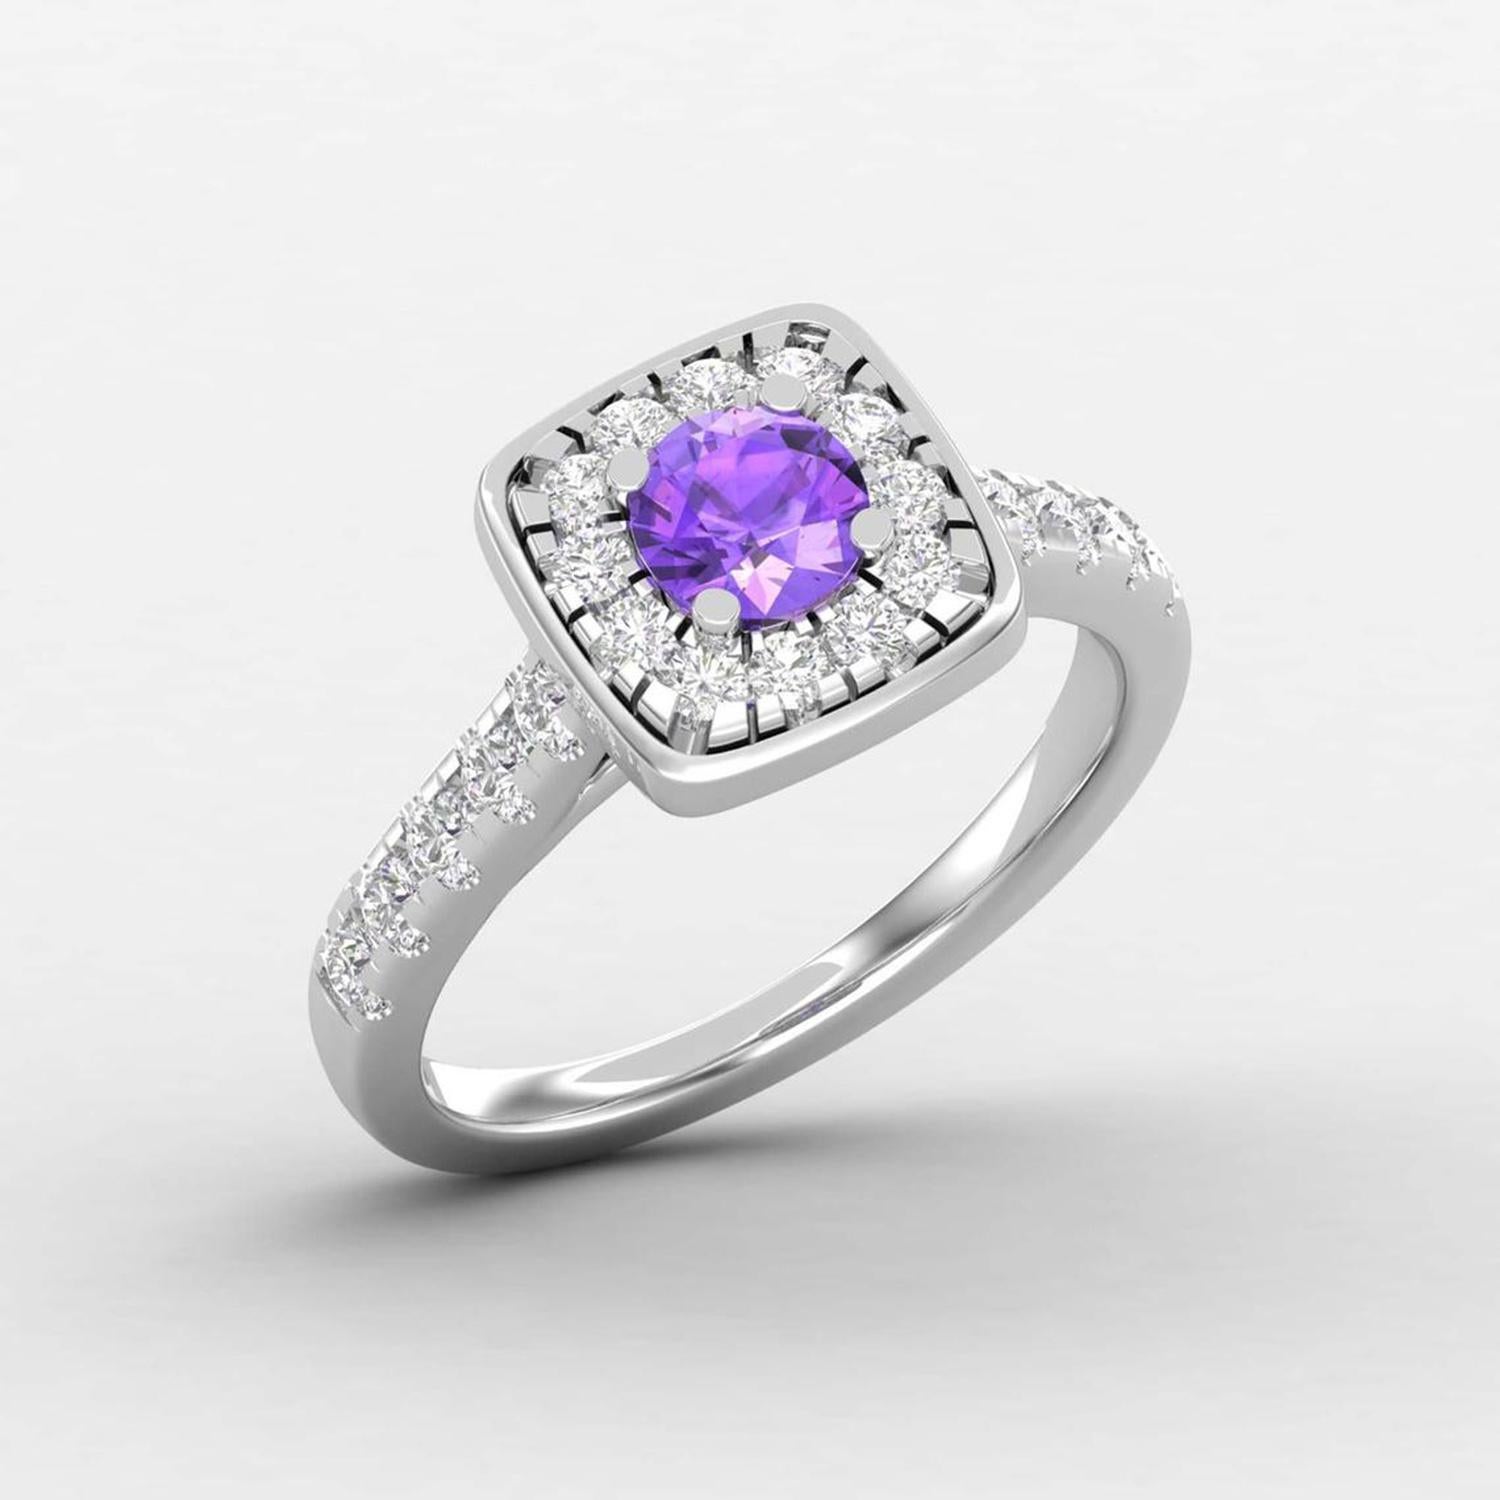 Round Cut 14 K Gold Amethyst Ring / 2 MM Round Diamond Solitaire Ring / Ring for Her For Sale